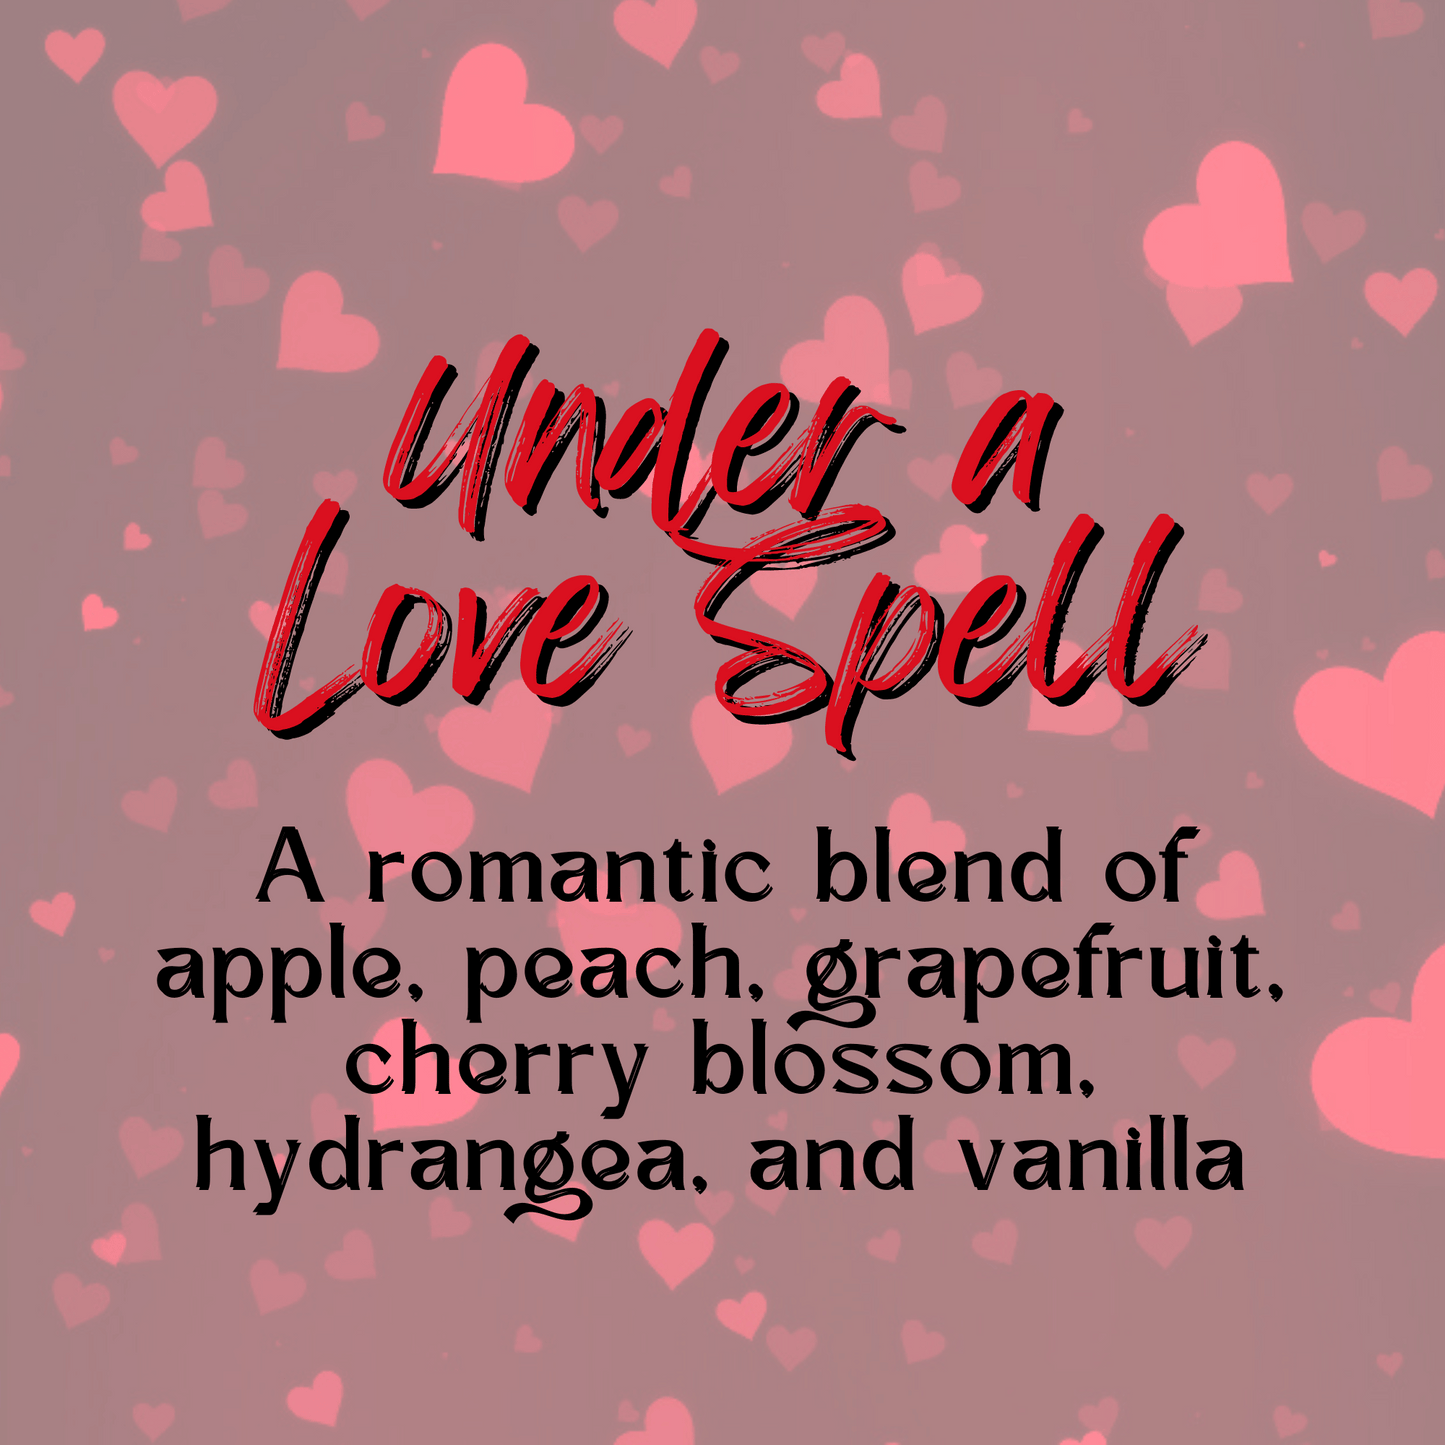 Nourishing Body Oil | Under a Love Spell | Choice of Size